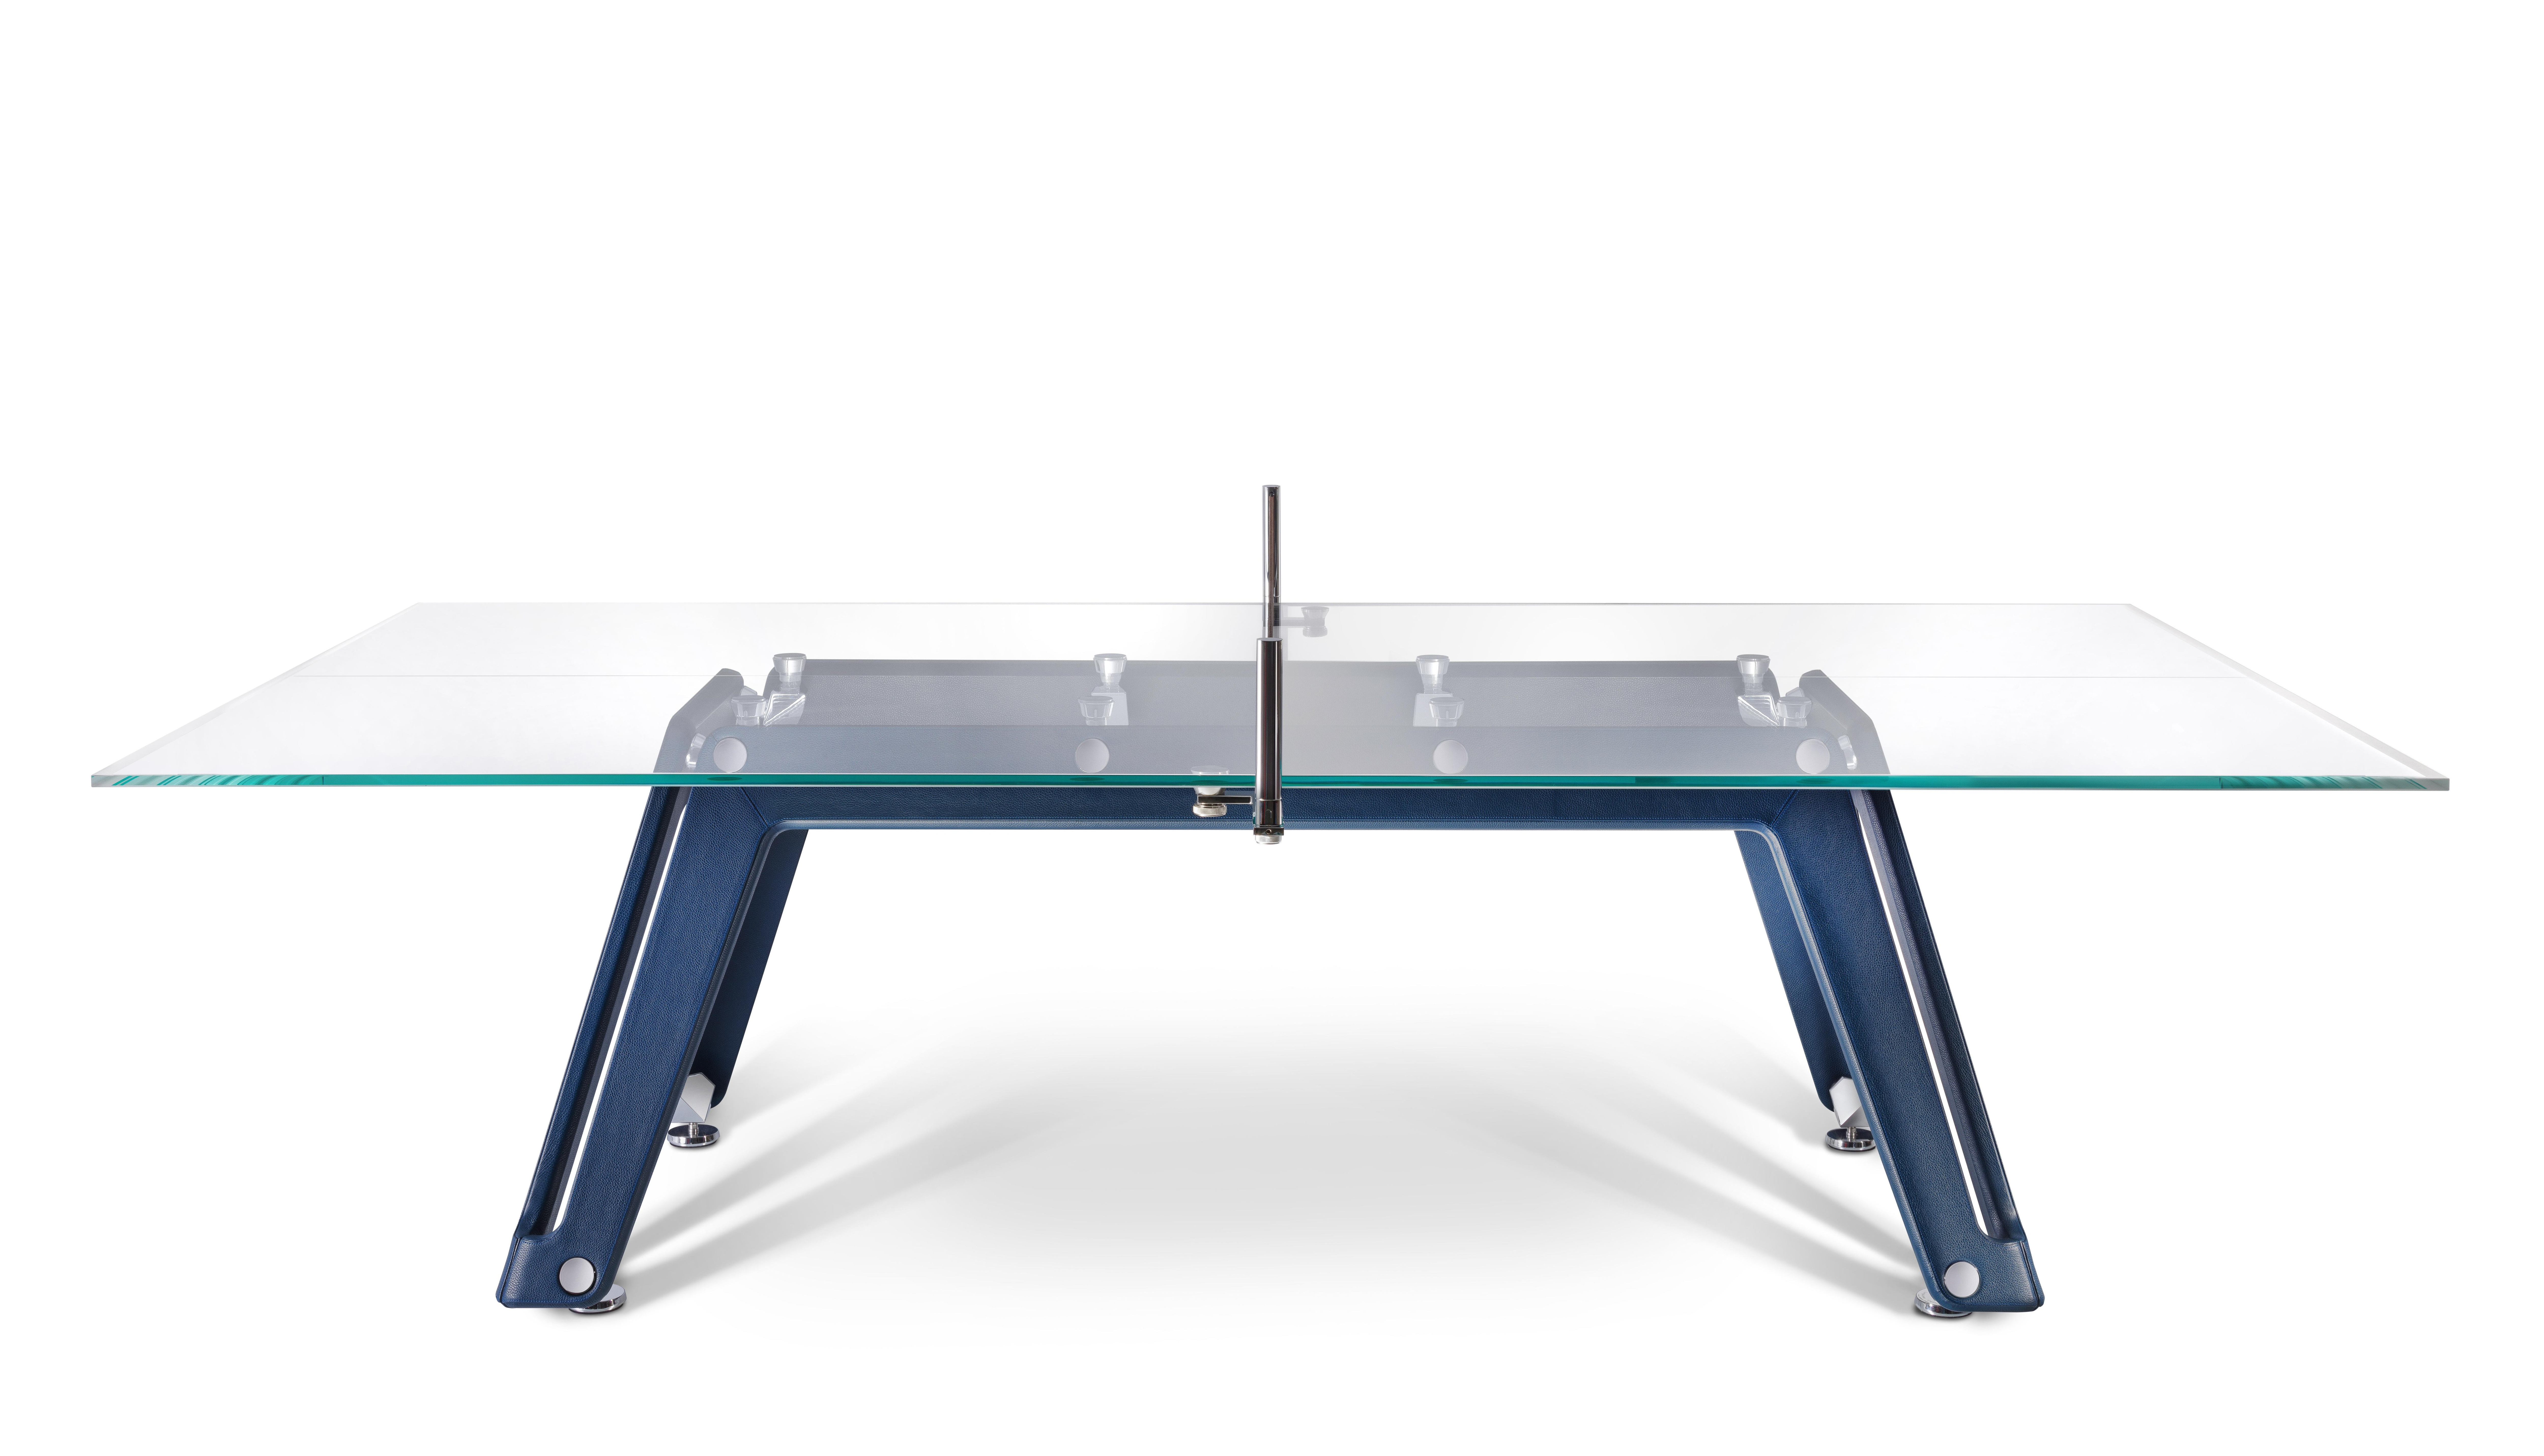 Lungolinea leather table Tennis by Impatia
Dimensions: D274 x W152.5 x H76 cm
Weight: 220 kg
Material: Low-iron glass table top
Leather table base. Chrome metal components.
Also Available: Different Colours and Materials.

The idea of playing on a